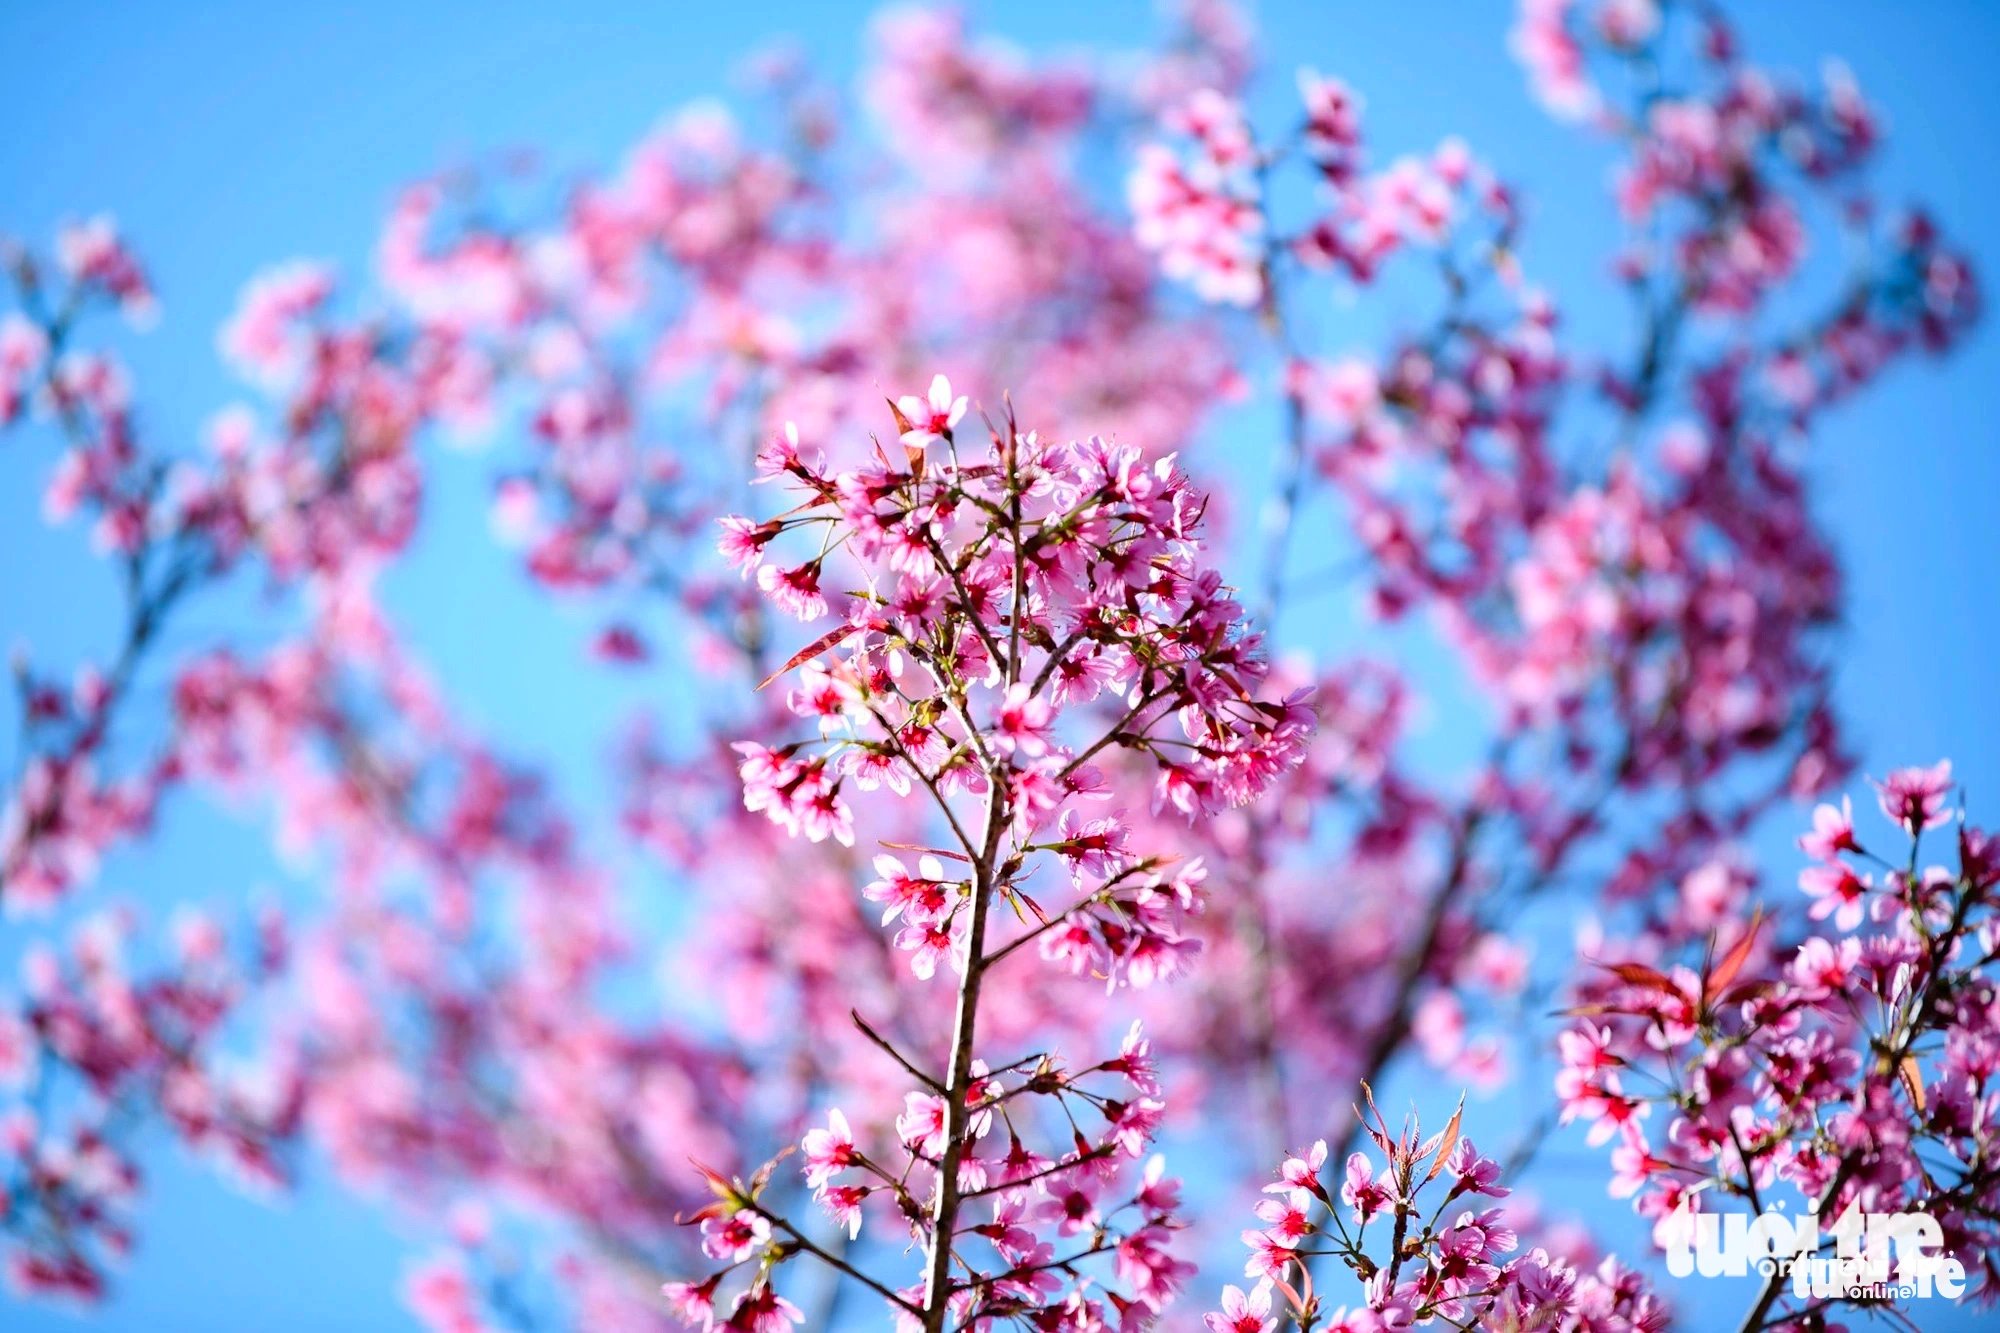 A close-up shot of wild Himalayan cherry blossoms (Prunus cerasoides), also known as sour cherry blossoms or locally as ‘hoa tớ dày,’ in La Pan Tan Commune, Mu Cang Chai District, Yen Bai Province, Vietnam. Photo: Nam Tran / Tuoi Tre